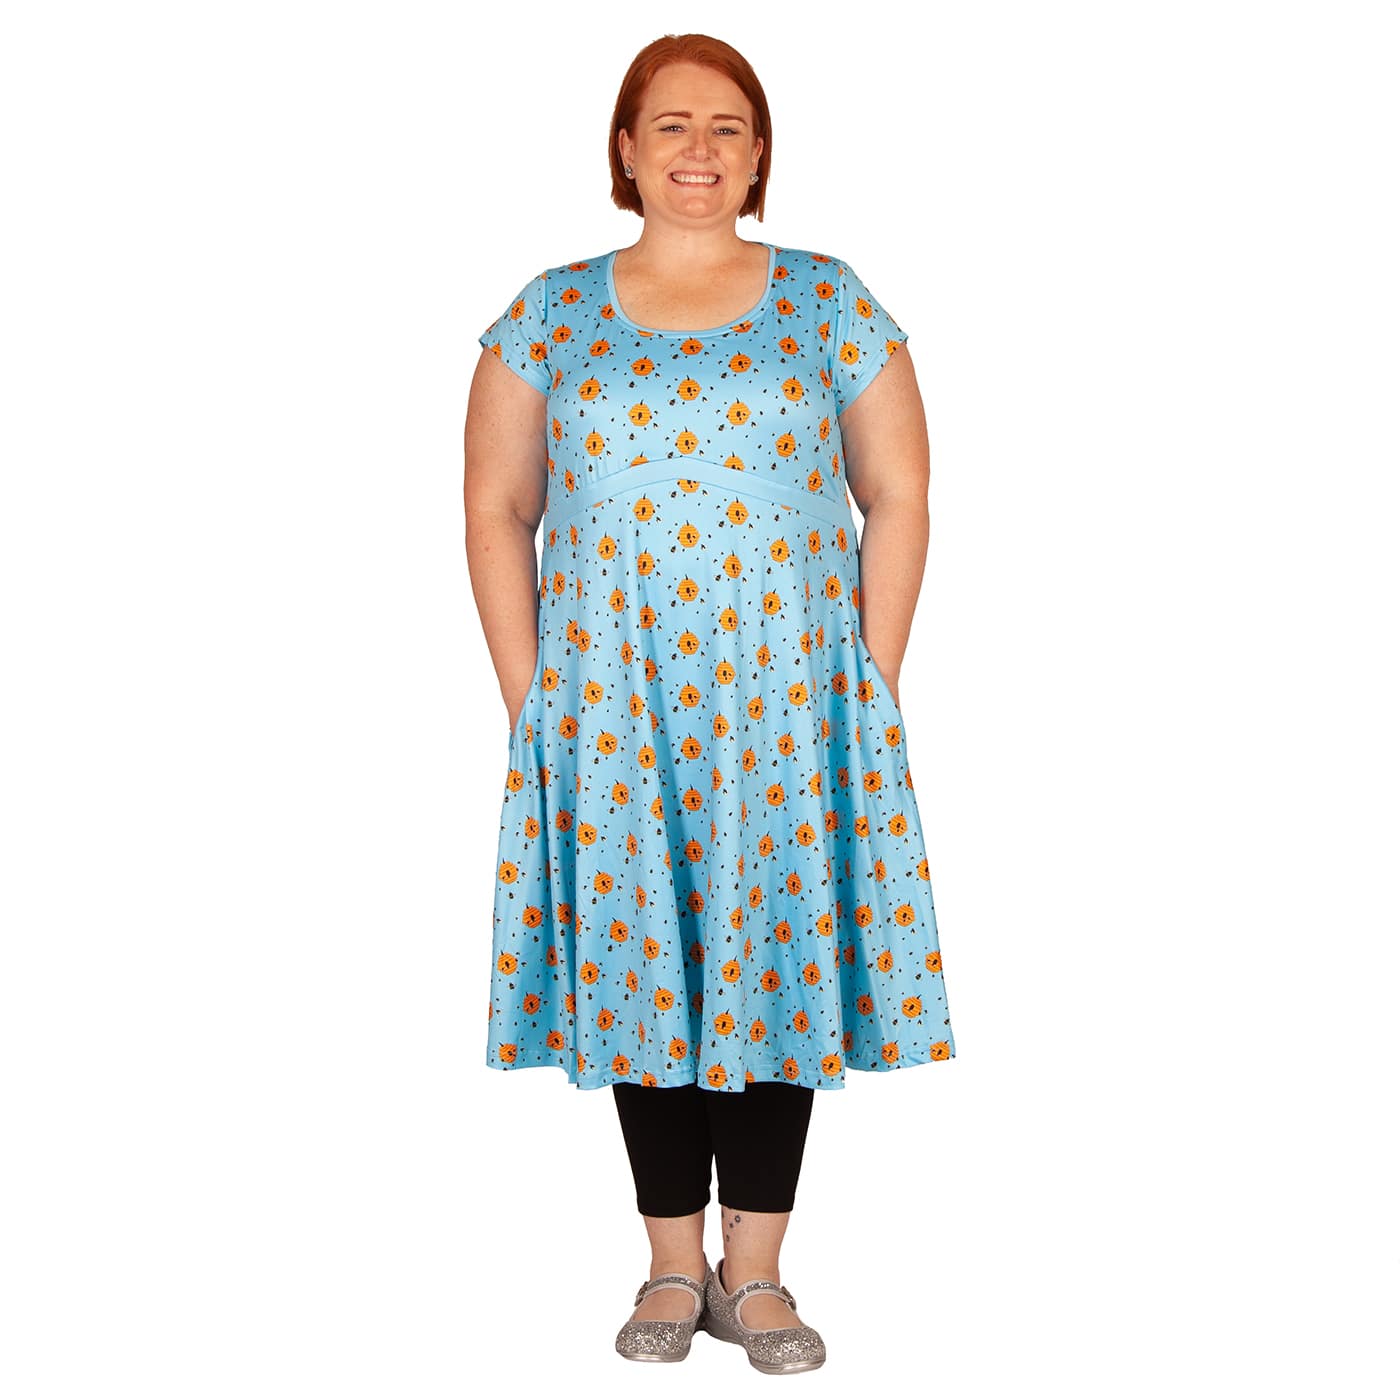 Hive Tea Dress by RainbowsAndFairies.com (Beehive - Bees - Bumblebee - Honey - Dress With Pockets - Rockabilly - Vintage Inspired - Rock & Roll) - SKU: CL_TEADR_BHIVE_ORG - Pic 07